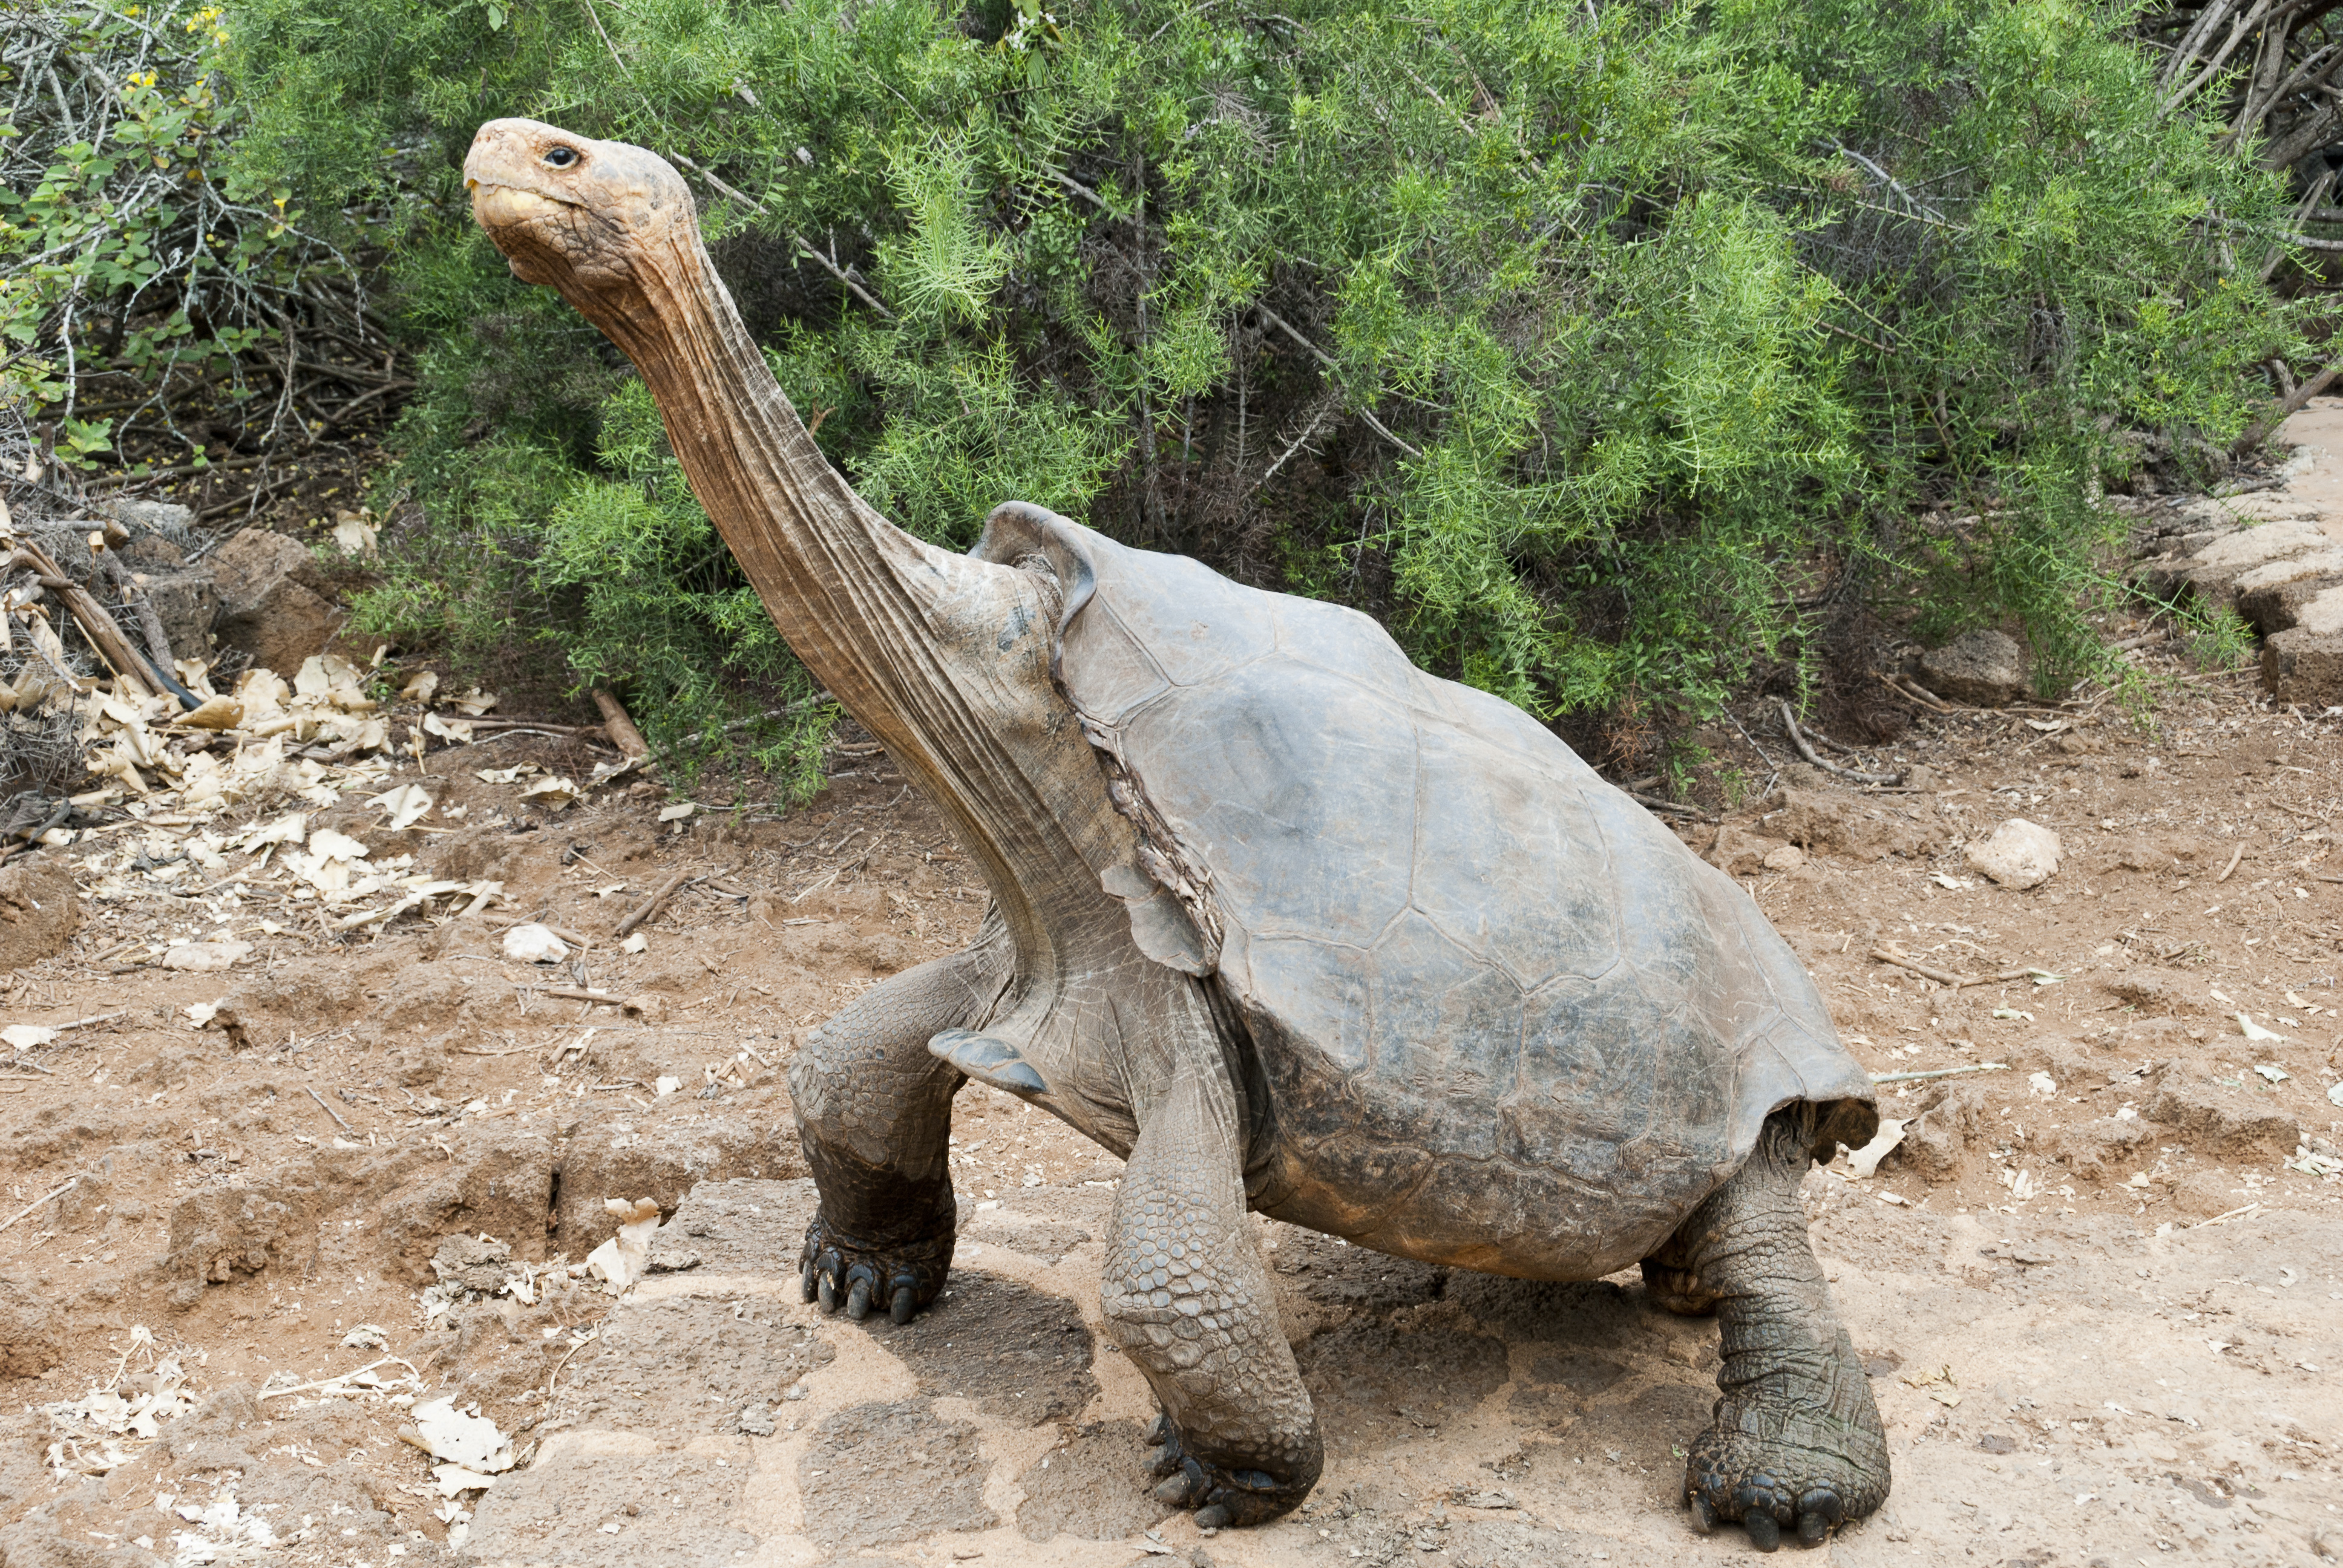 Ecuador's giant tortoise is standing on a bare ground